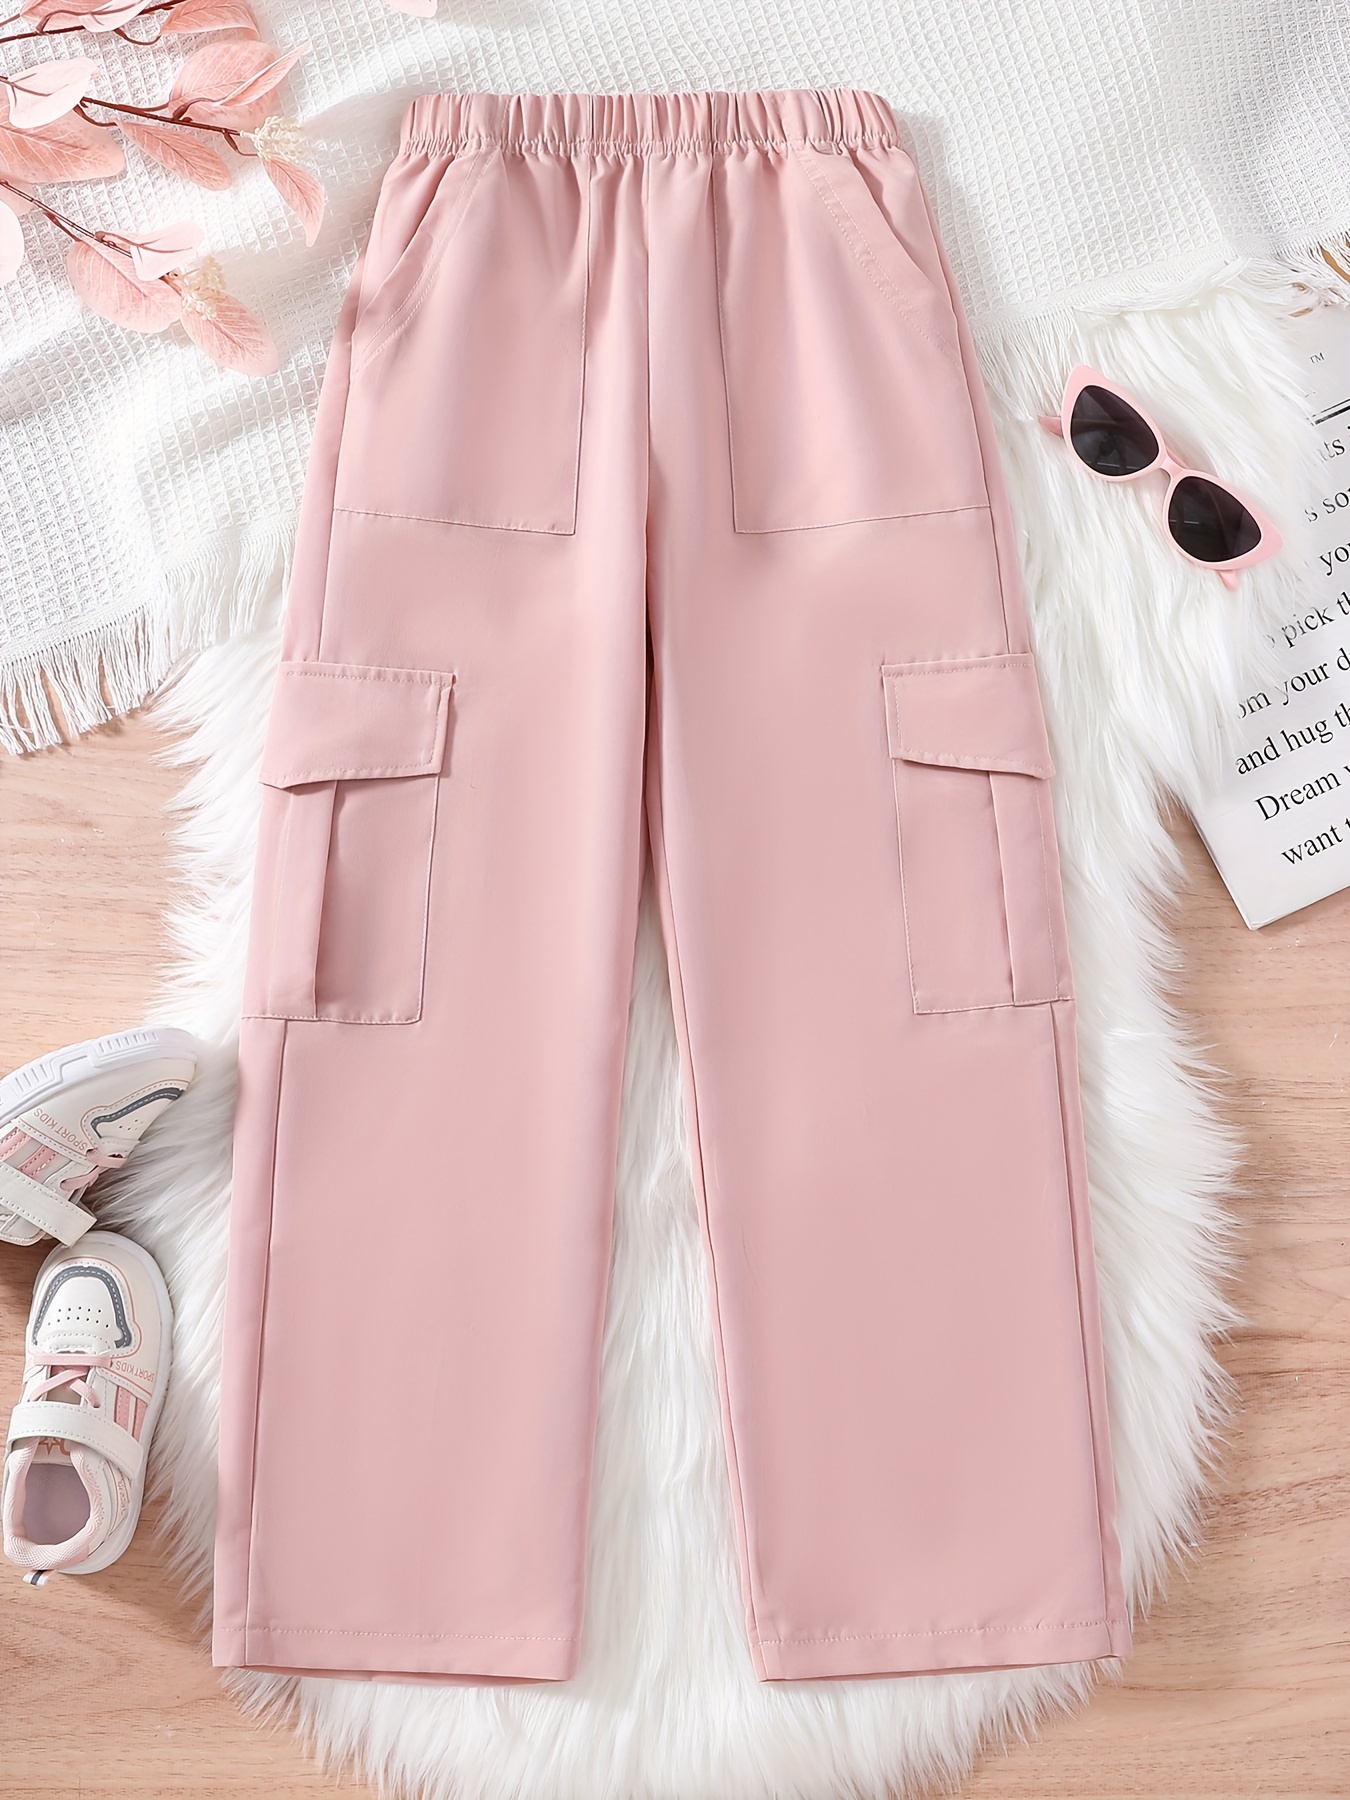 Women Workplace Trousers with Belt Casual Versatile Straight Leg Pants  Temperament Elegant Pants with Pockets (Pink, L)